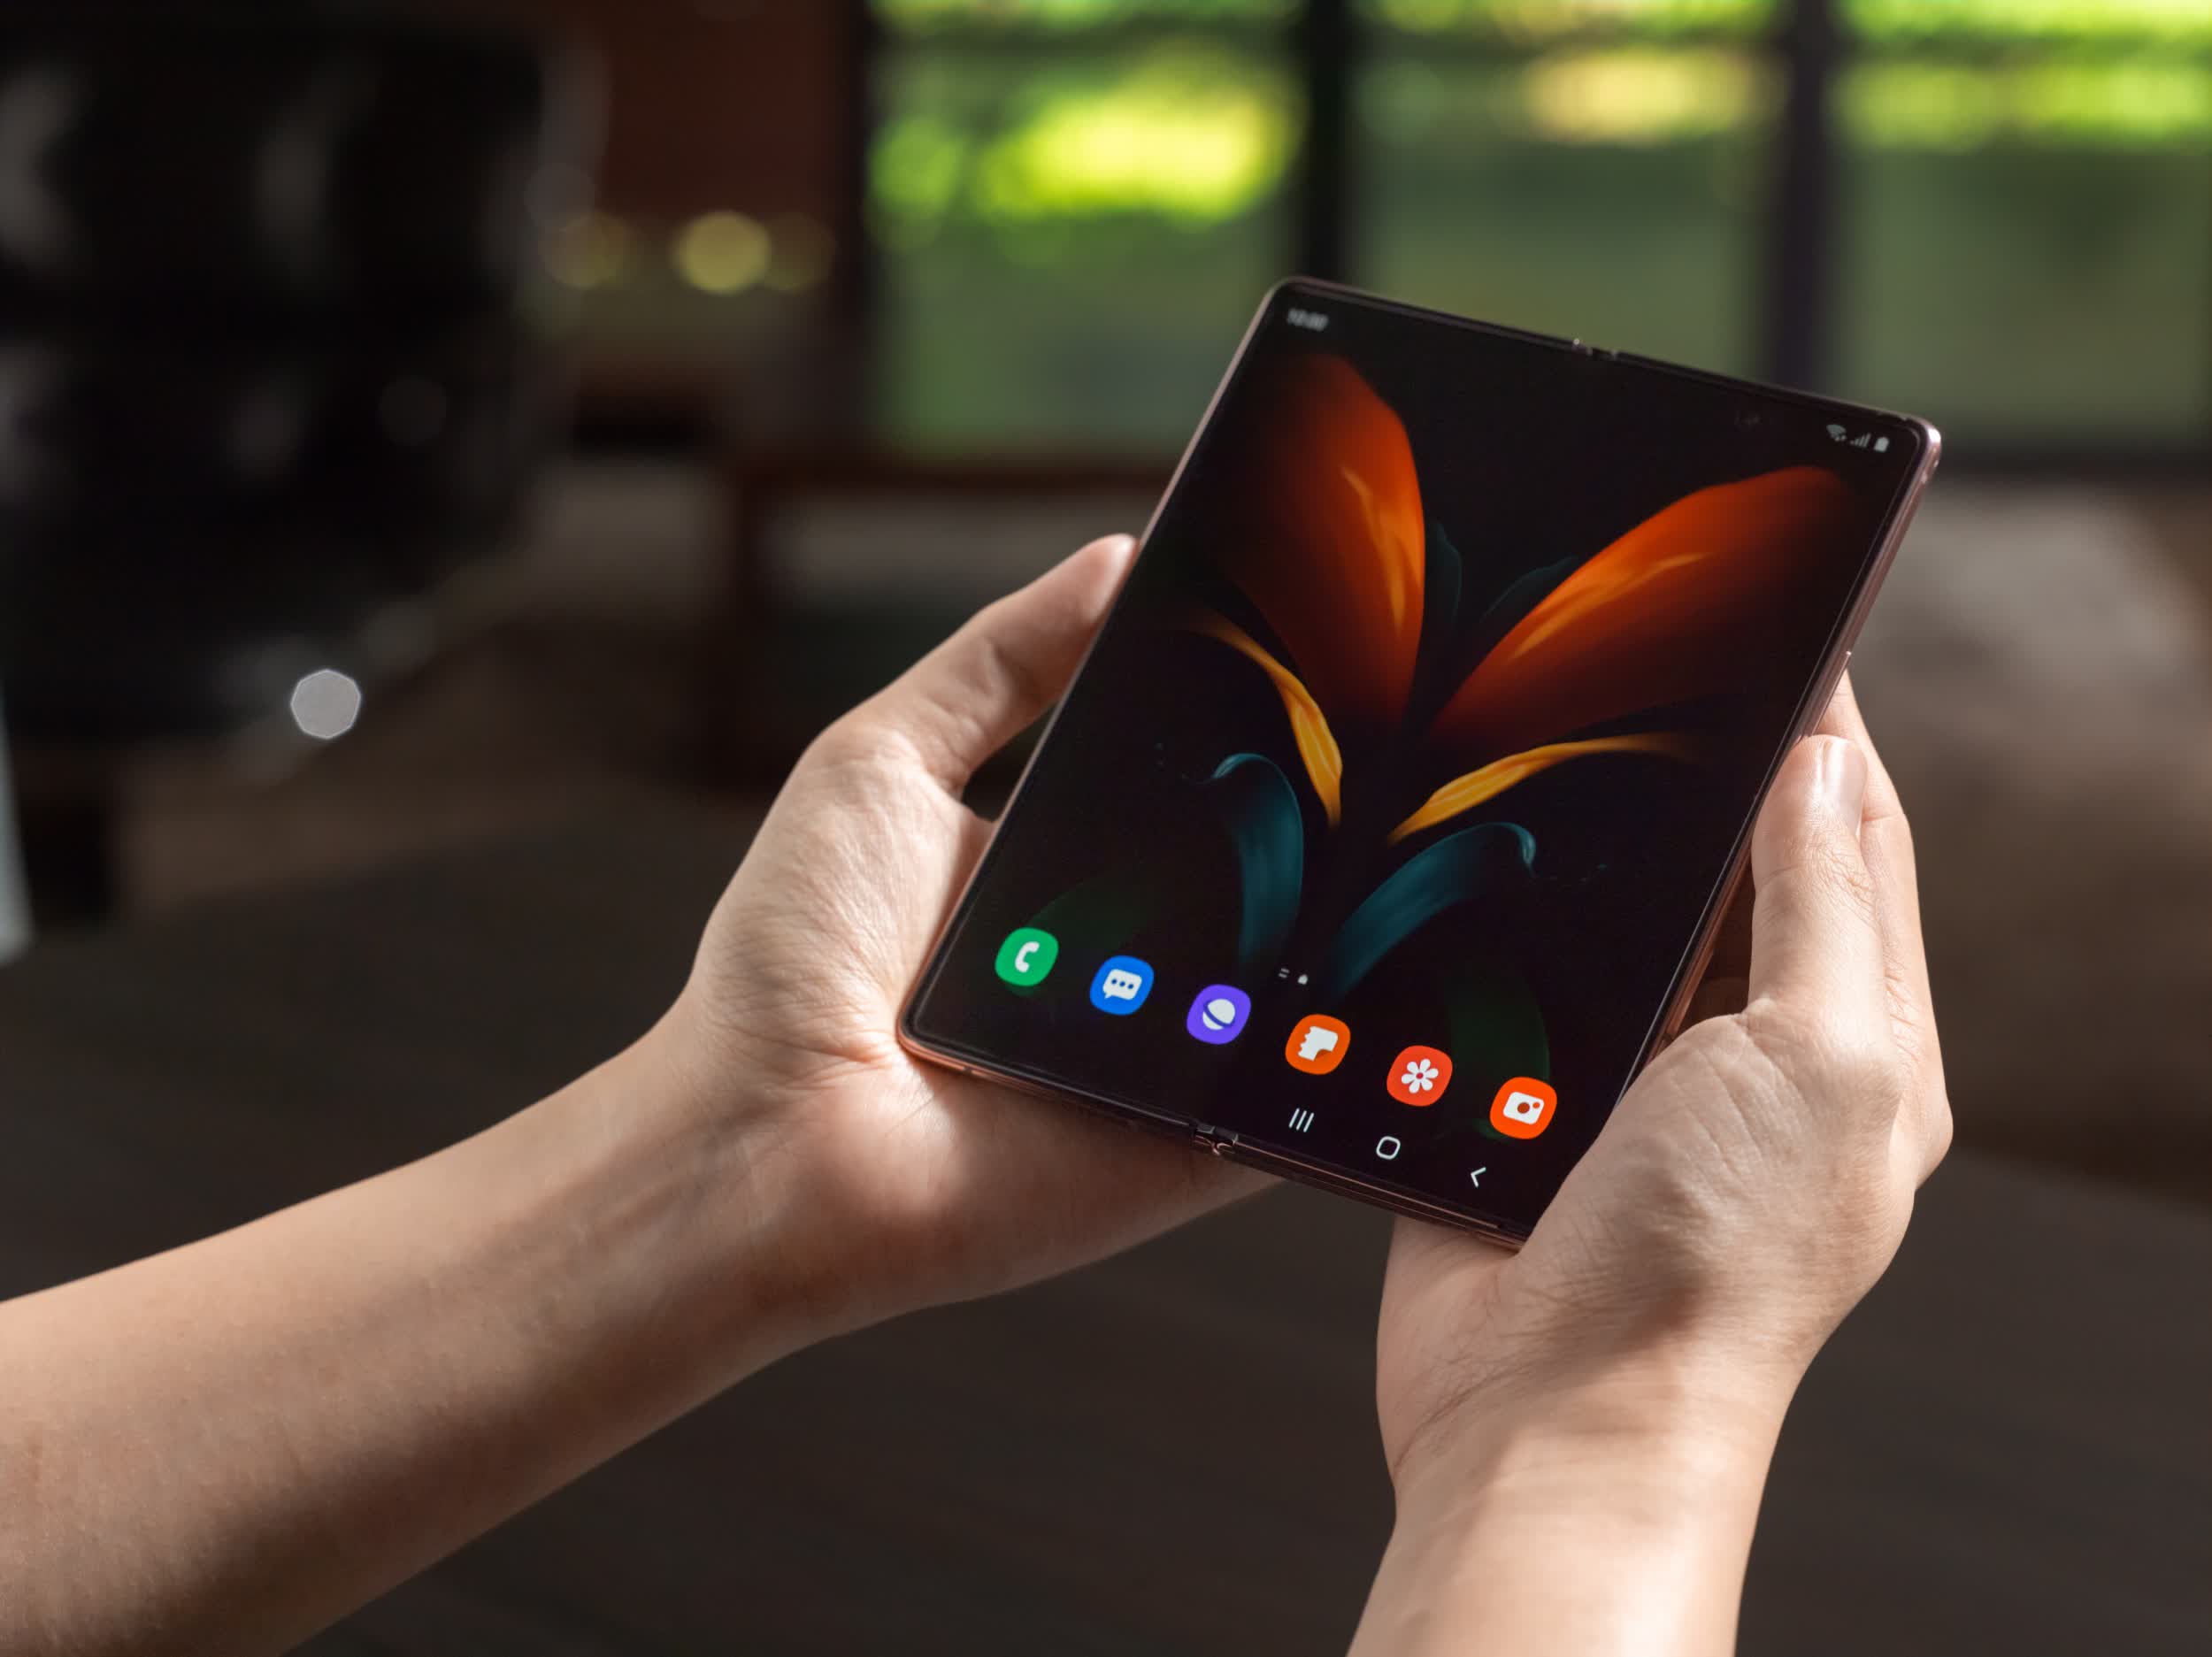 Samsung prices Galaxy Z Fold 2 higher than the original Fold at $1,999.